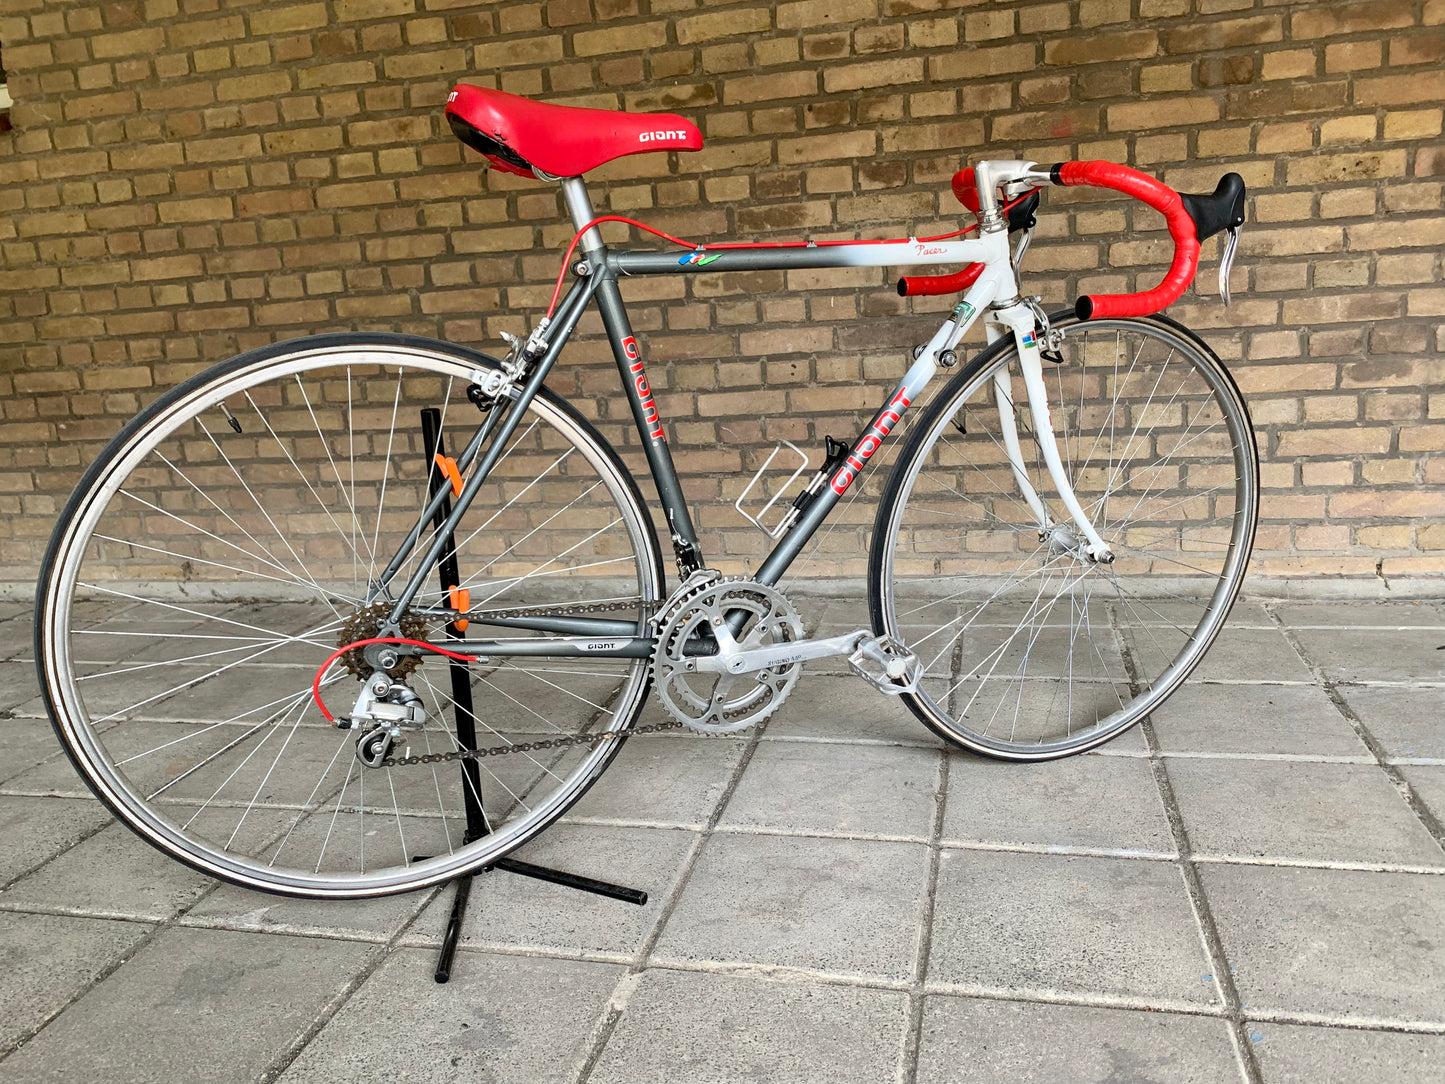 1985 Giant Pacer 51cm